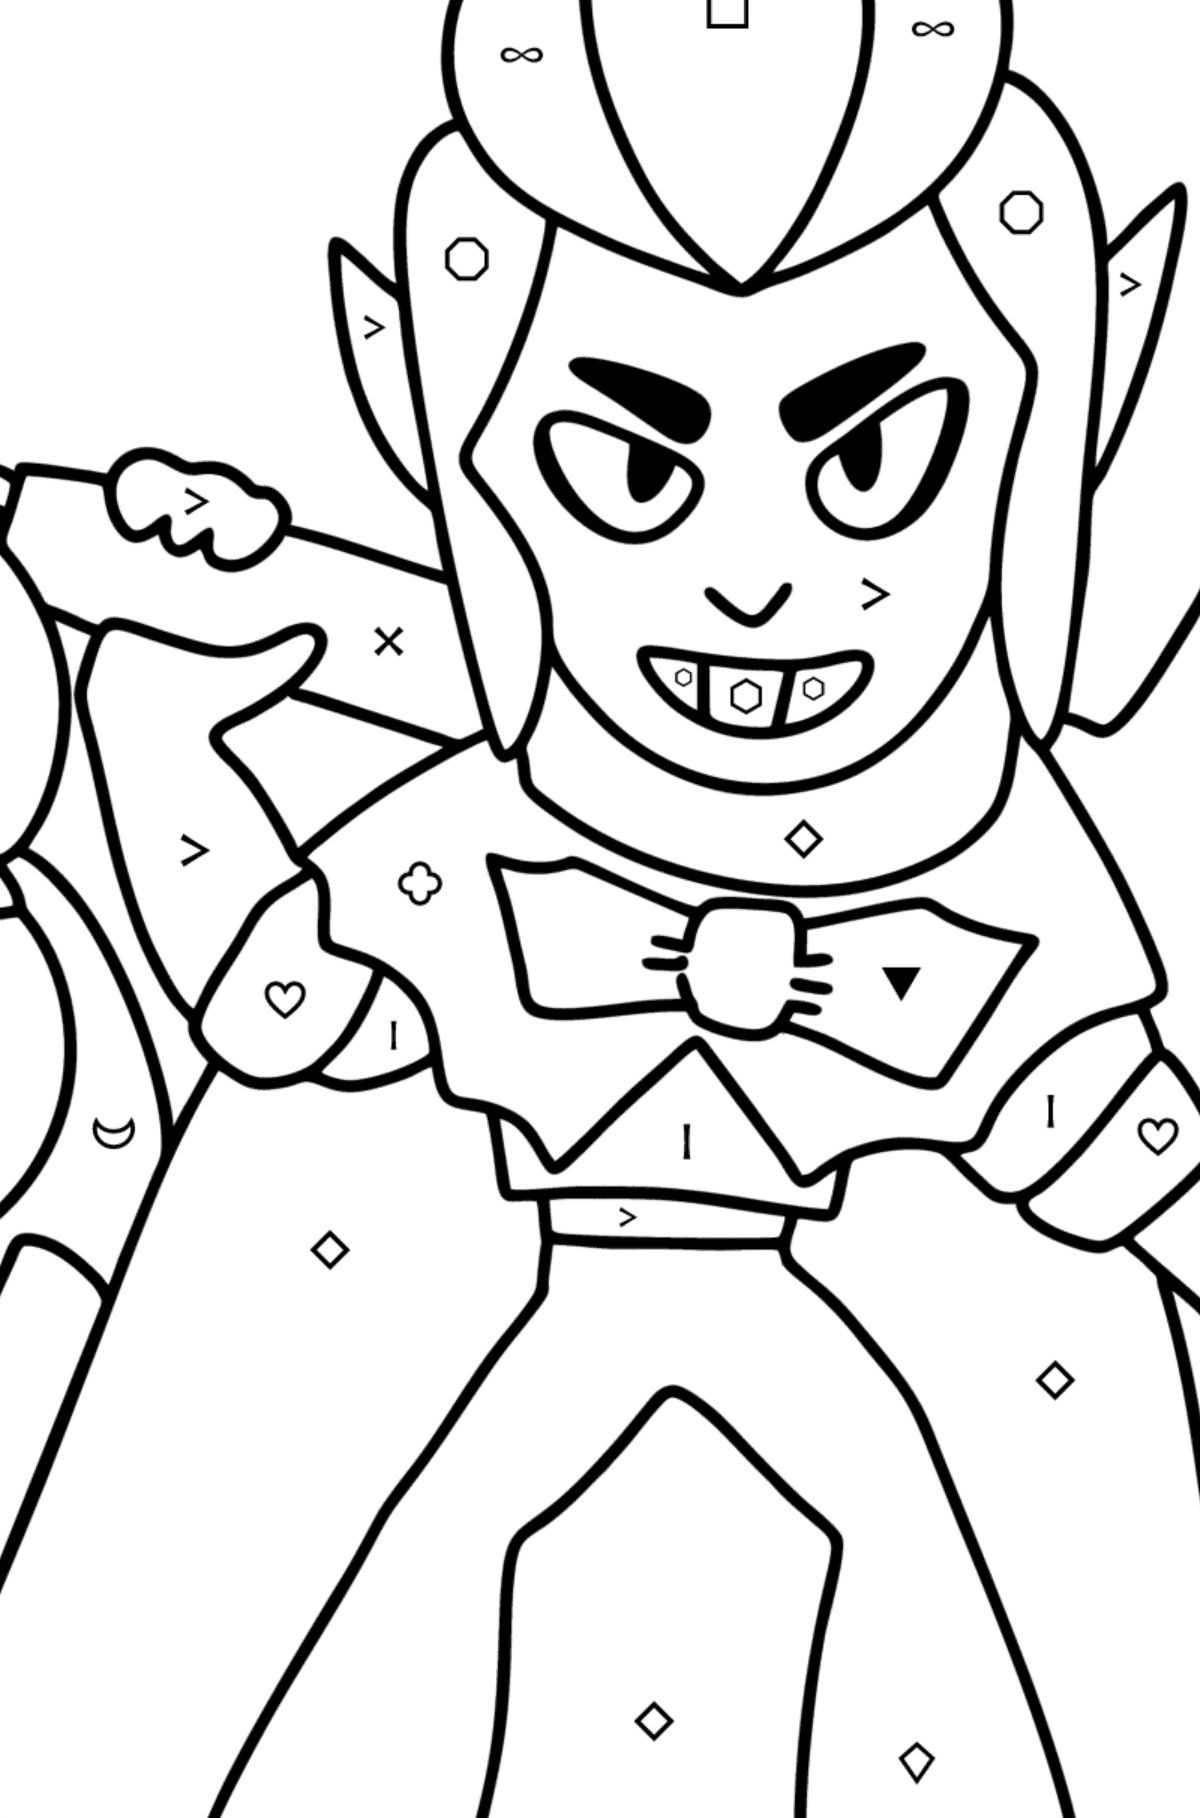 Brawl Stars Mortis coloring page - Coloring by Symbols and Geometric Shapes for Kids